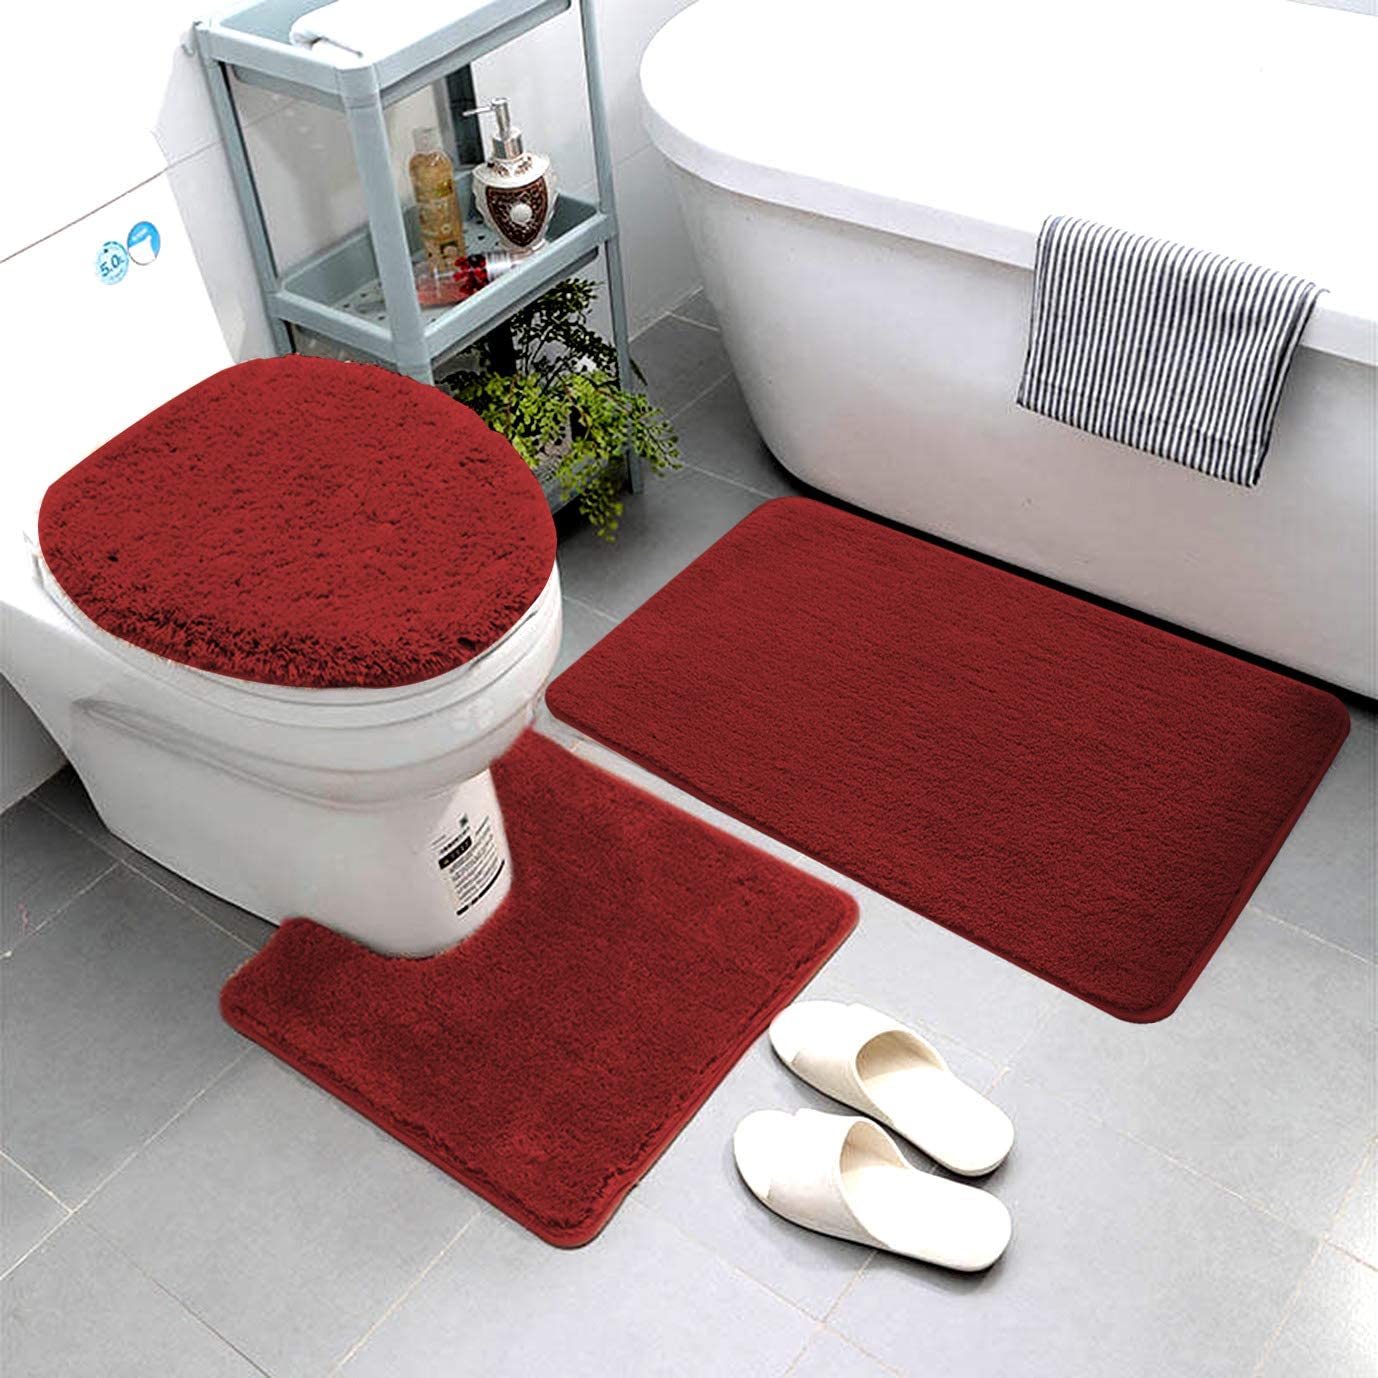 3-PC Butterfly Bathroom Rug Set Toilet Cover Bath Mat Solid Contour Rug 